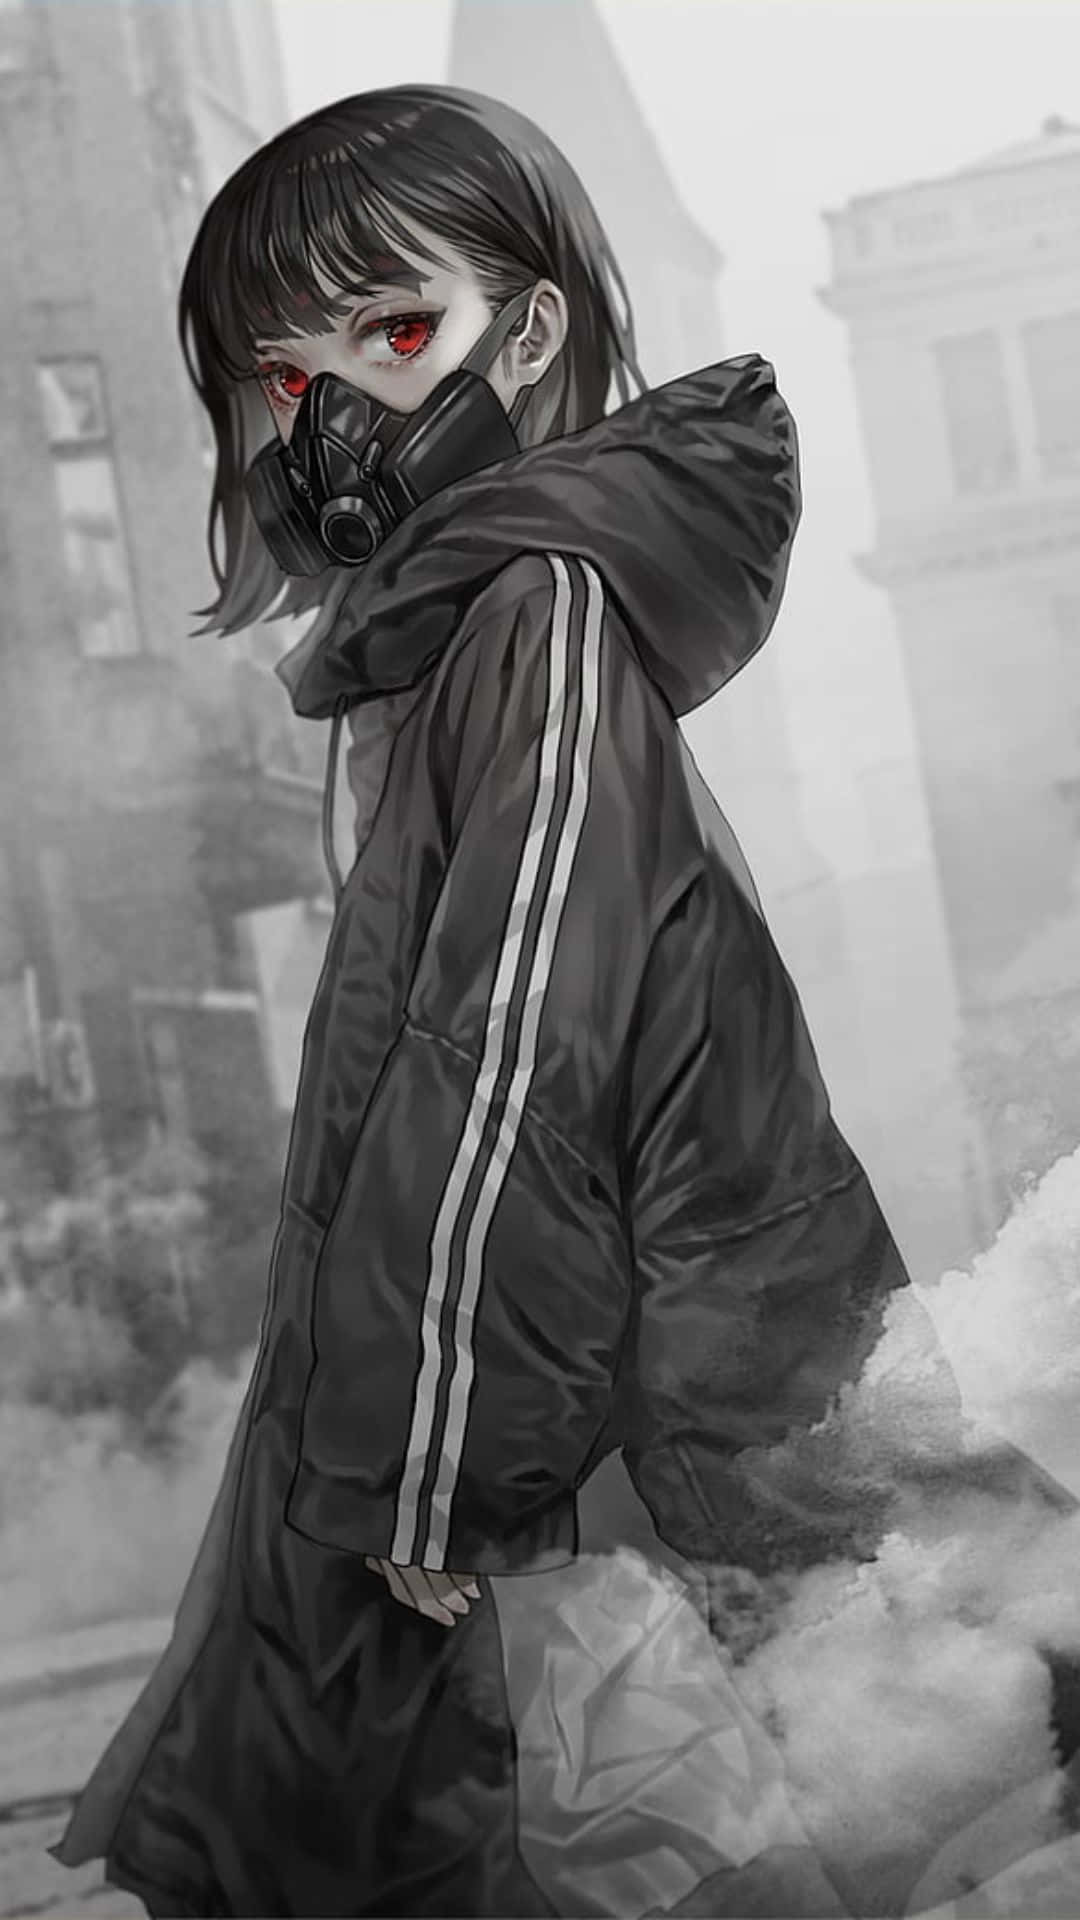 A Girl In A Black Coat With A Mask On Her Face